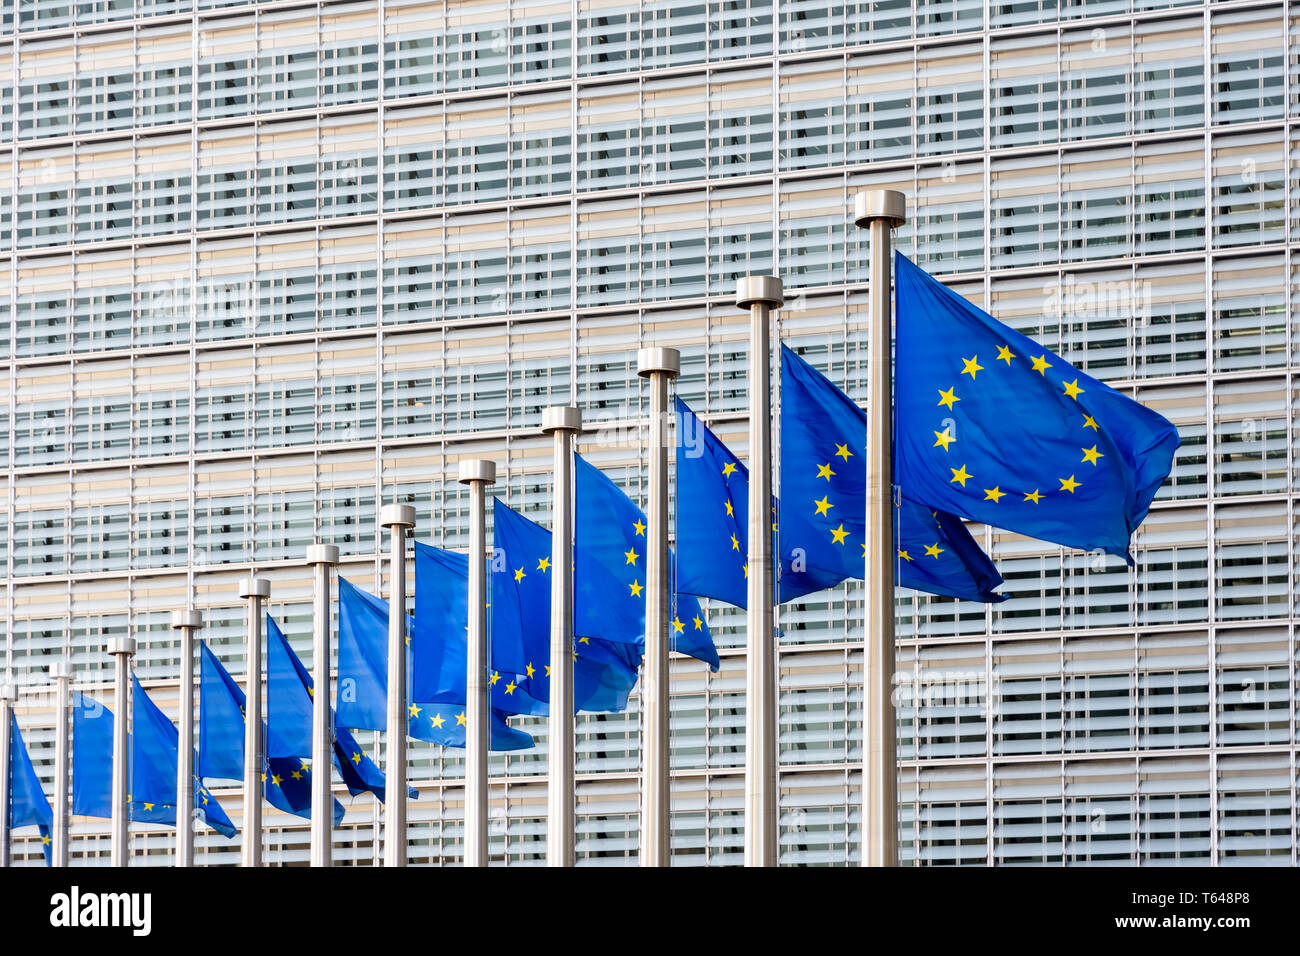 Flags of the European Union blowing in the wind in front of the Berlaymont building, headquarters of the European Commission in Brussels, Belgium. Stock Photo